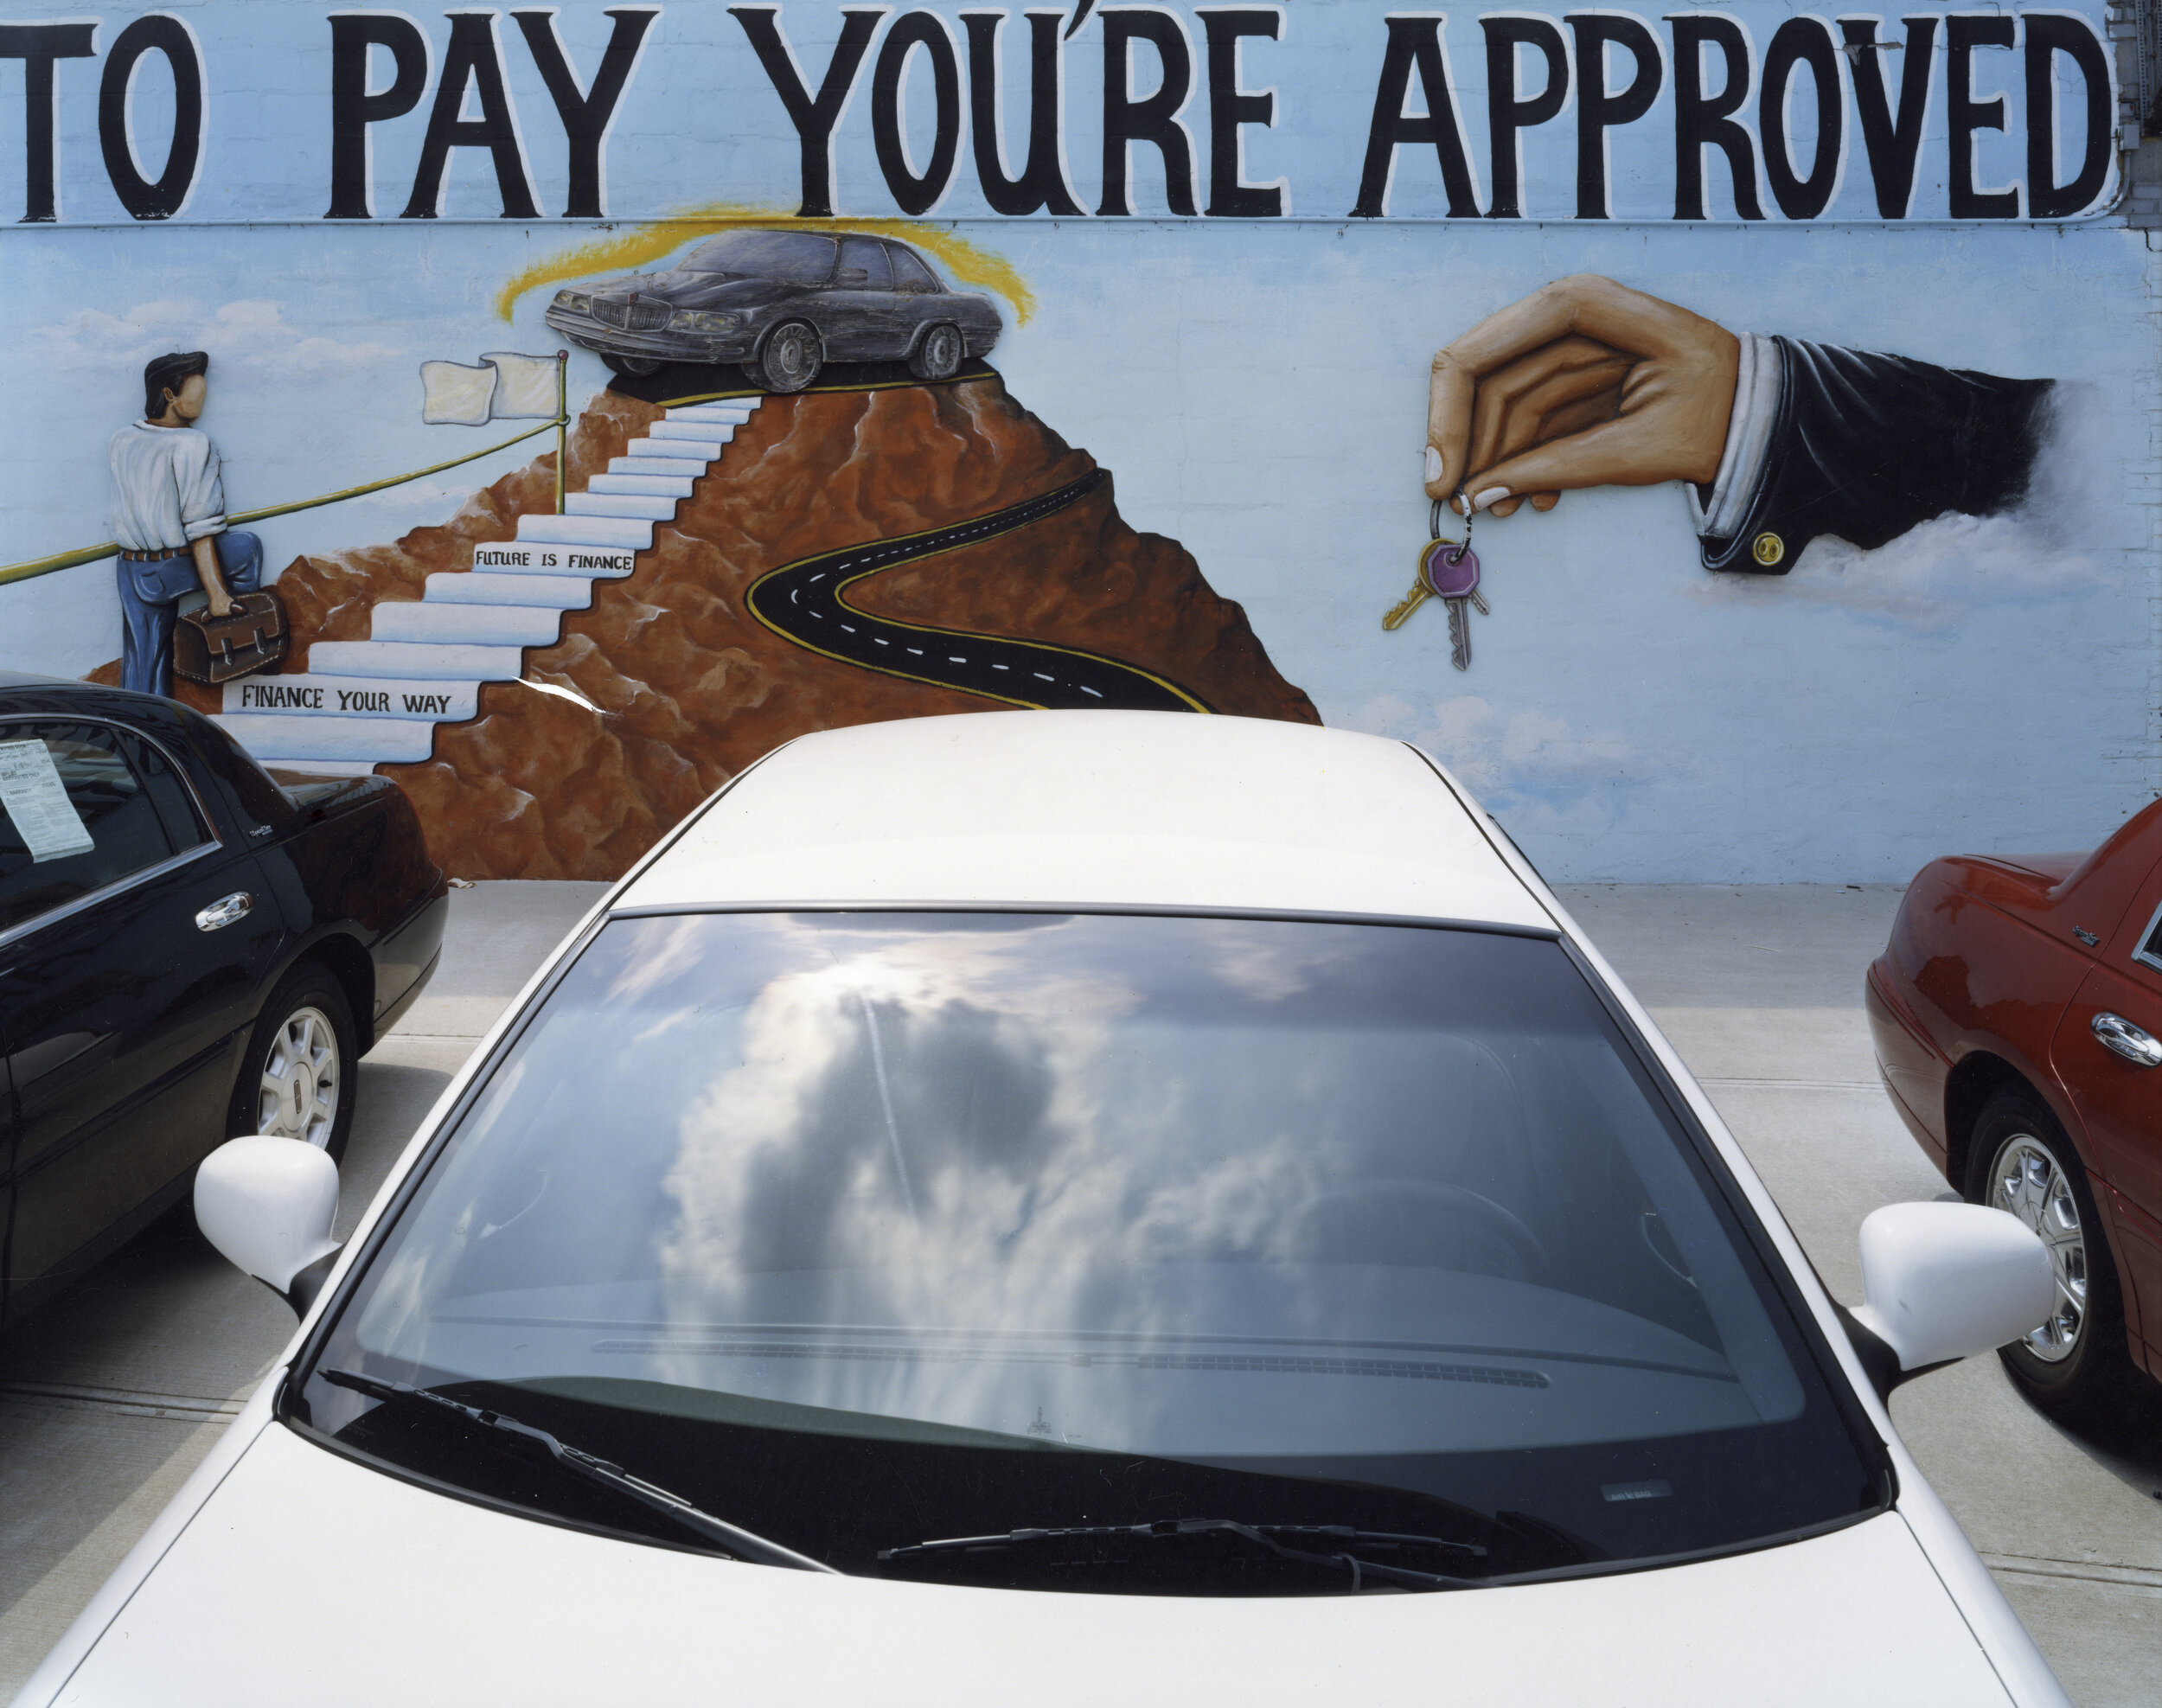 “If You Plan to Pay You're Approved”  Masada Auto Sales  7212 Queens Boulevard, Woodside, Queens 